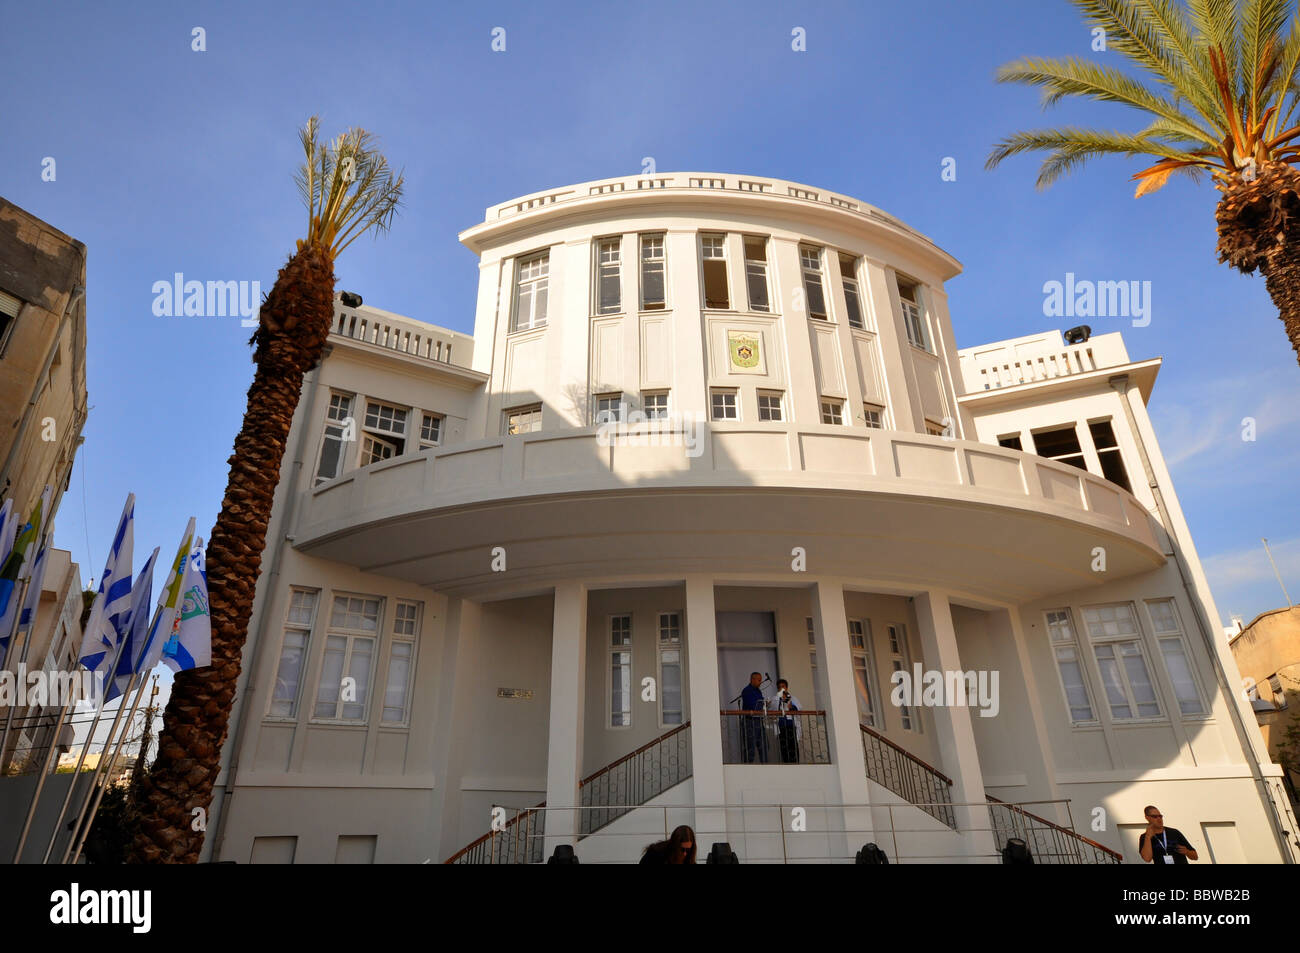 Tel Aviv Bialik House High Resolution Stock Photography and Images - Alamy